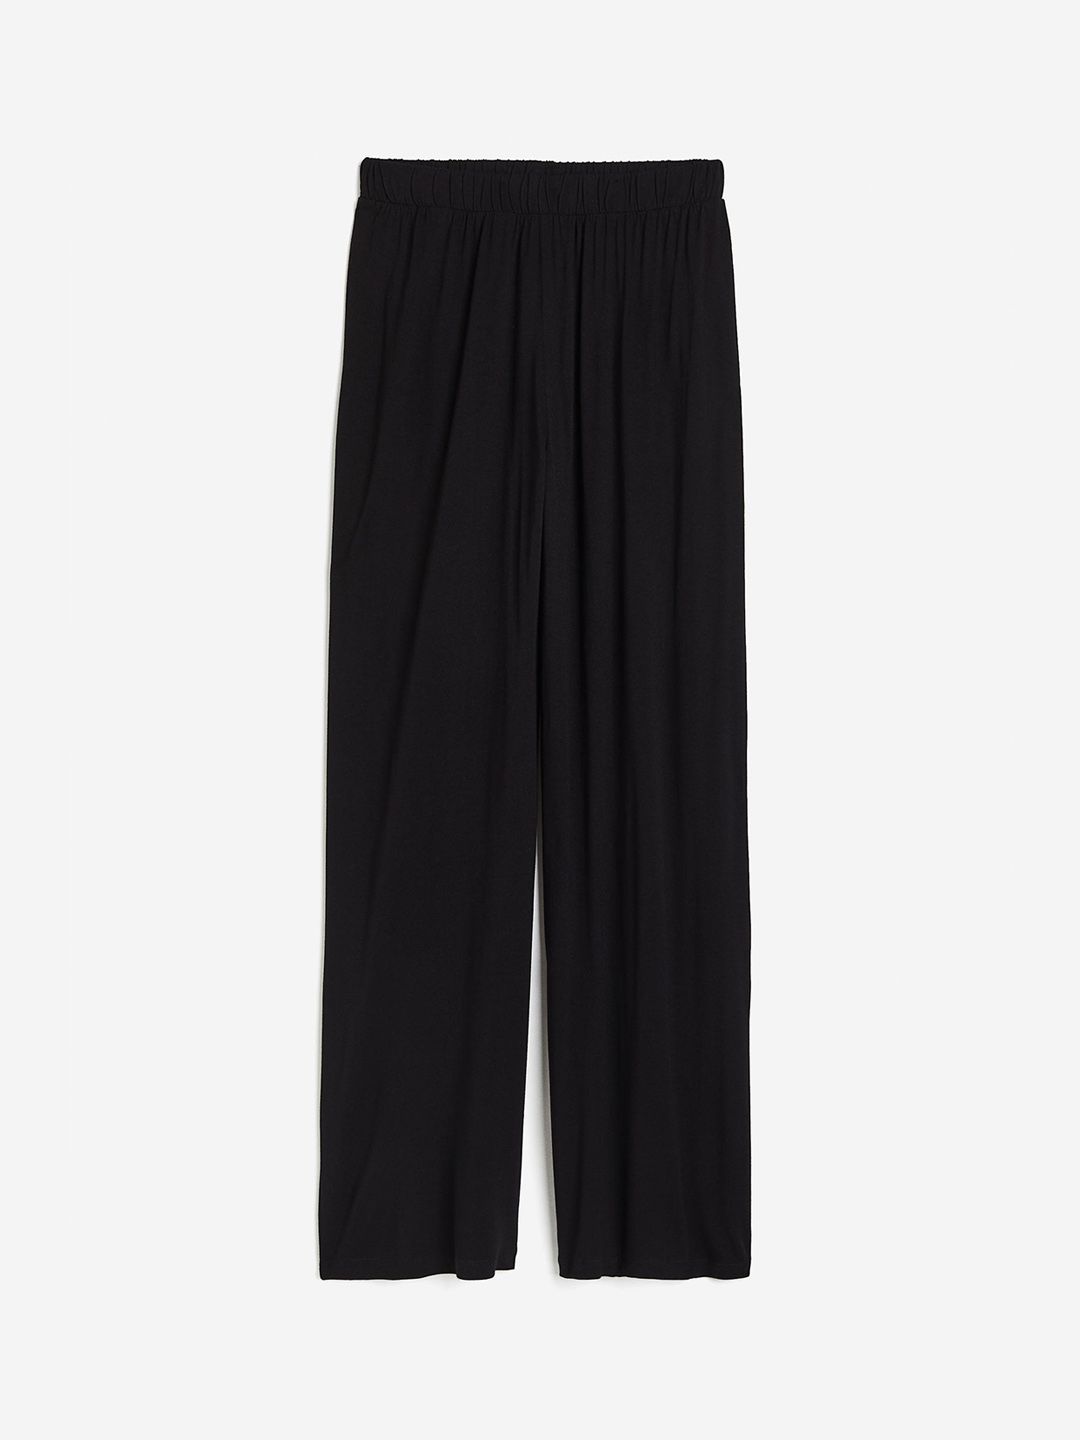 H&M Women Loose Fit Trousers Price in India